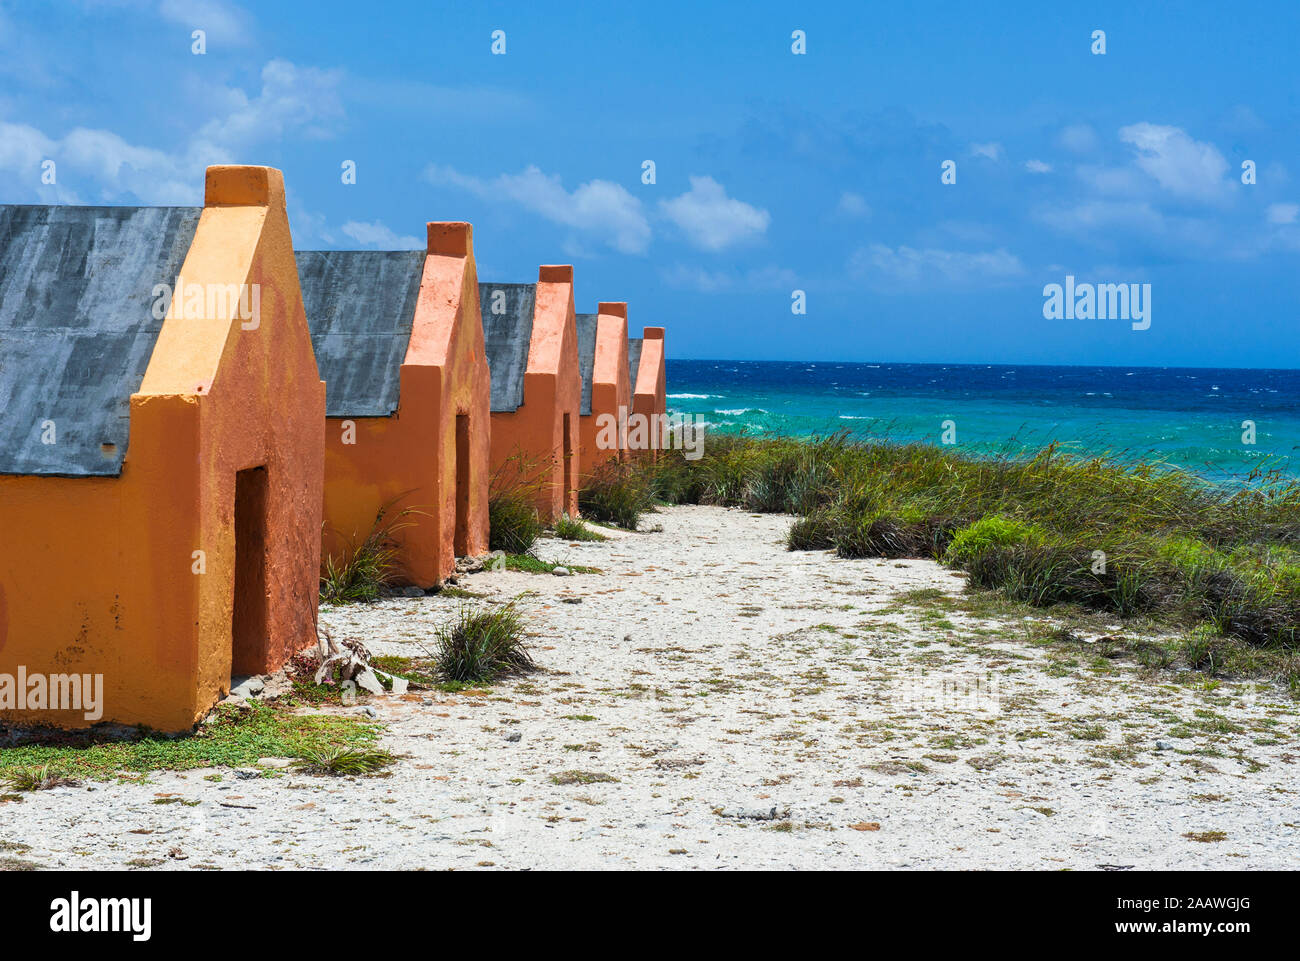 Slave huts at beach against blue sky during sunny day, Bonaire, ABC Islands, Caribbean Netherlands Stock Photo